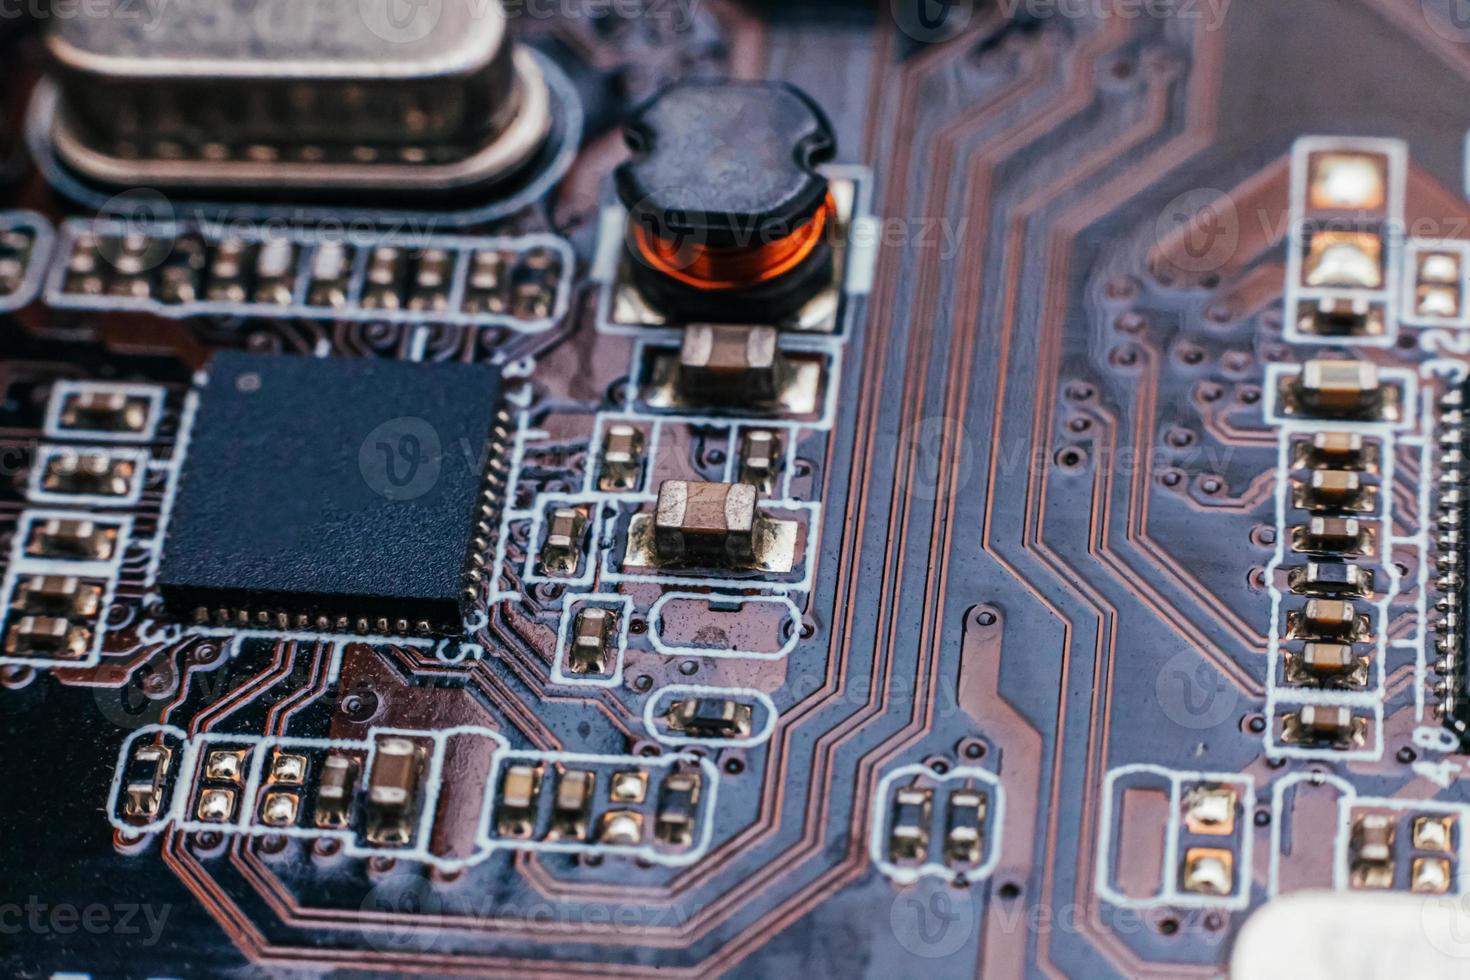 Circuit board repair. Electronic hardware modern technology. Motherboard digital personal computer chip. Tech science background. Integrated communication processor. Information engineering component photo